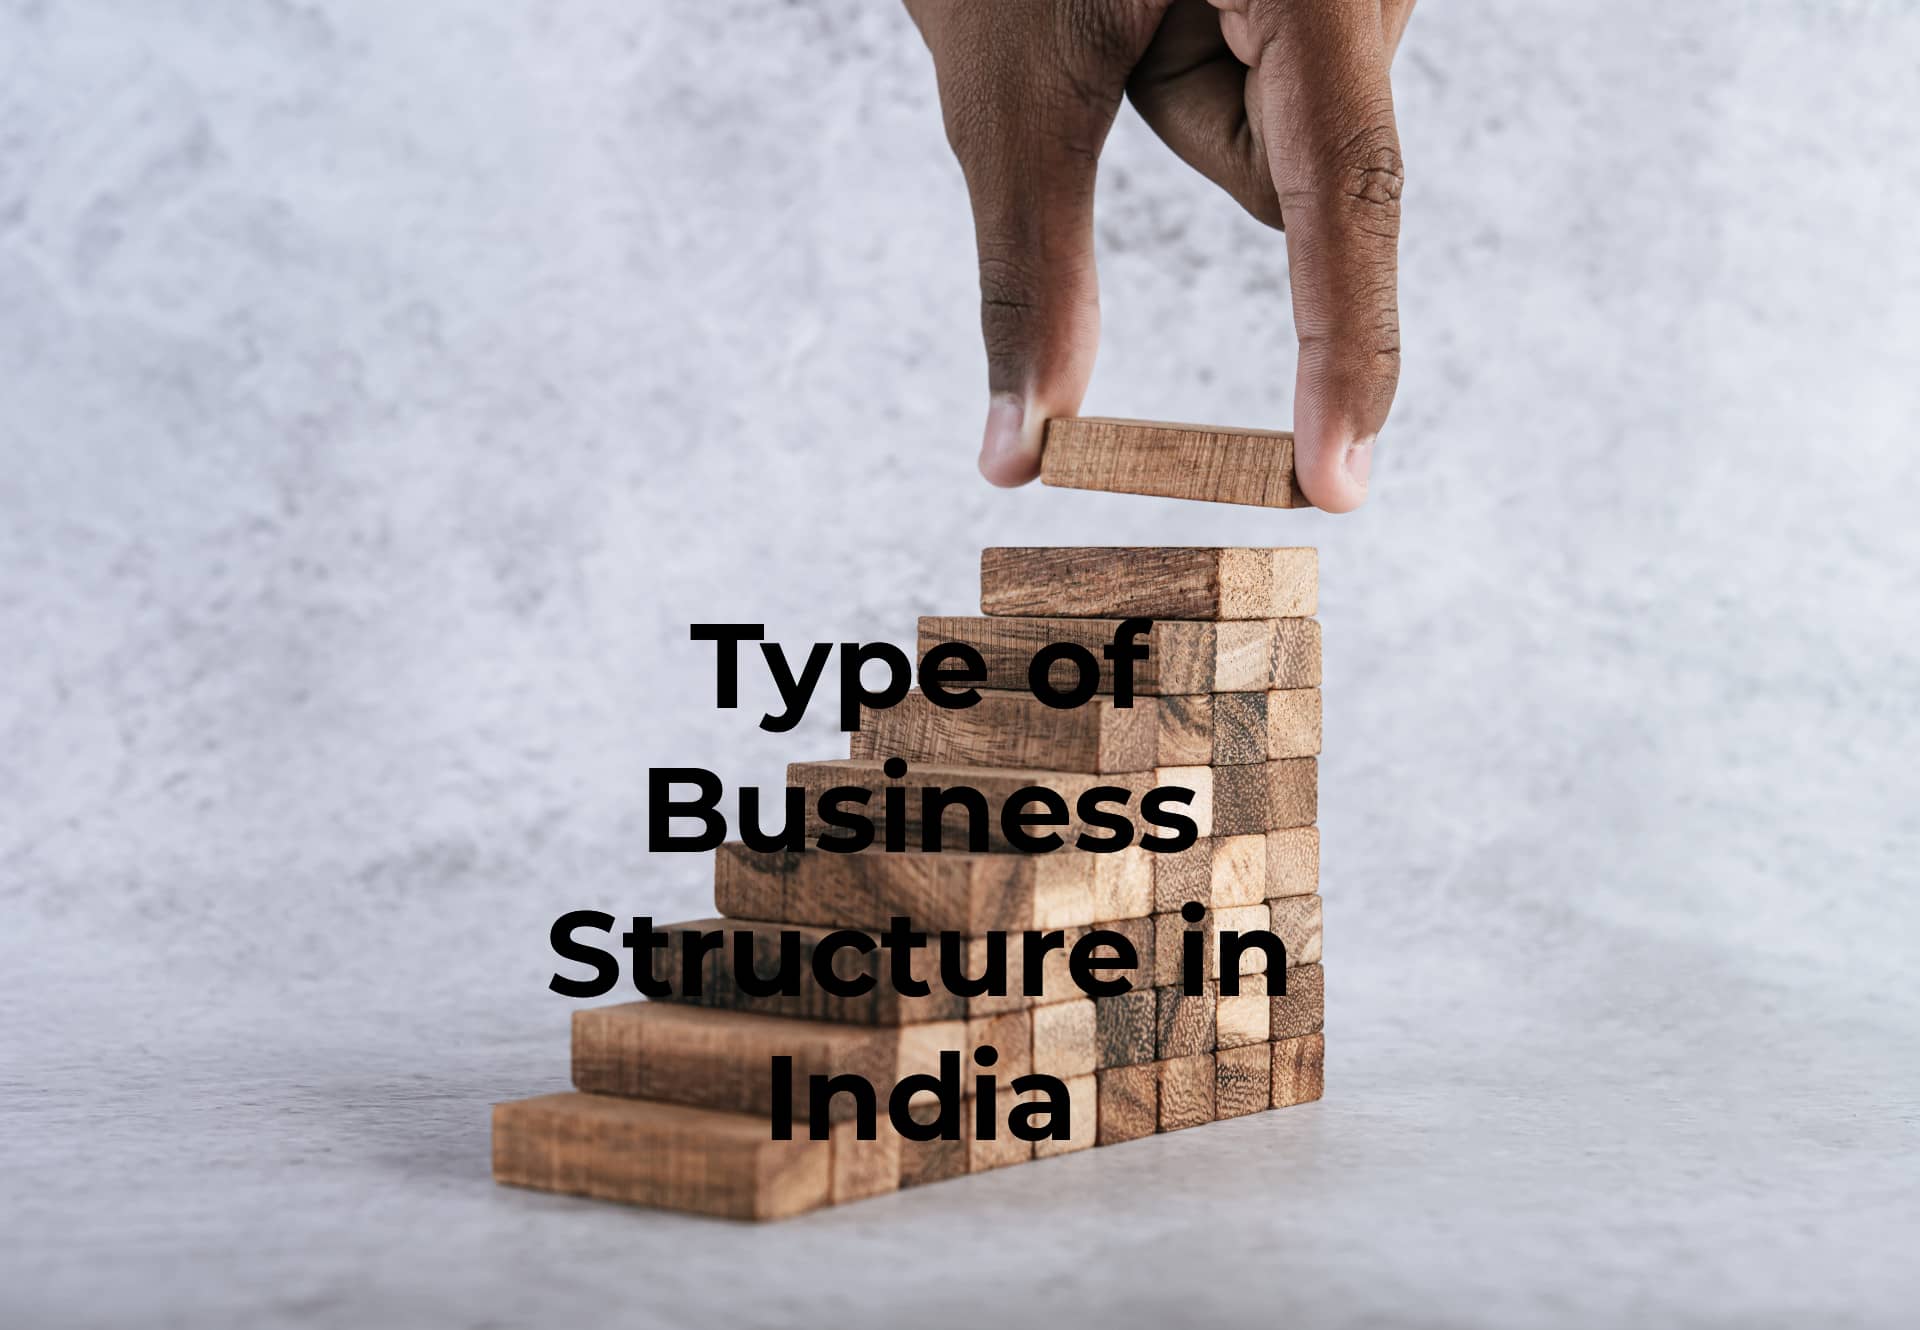 Type of Business Structure in India